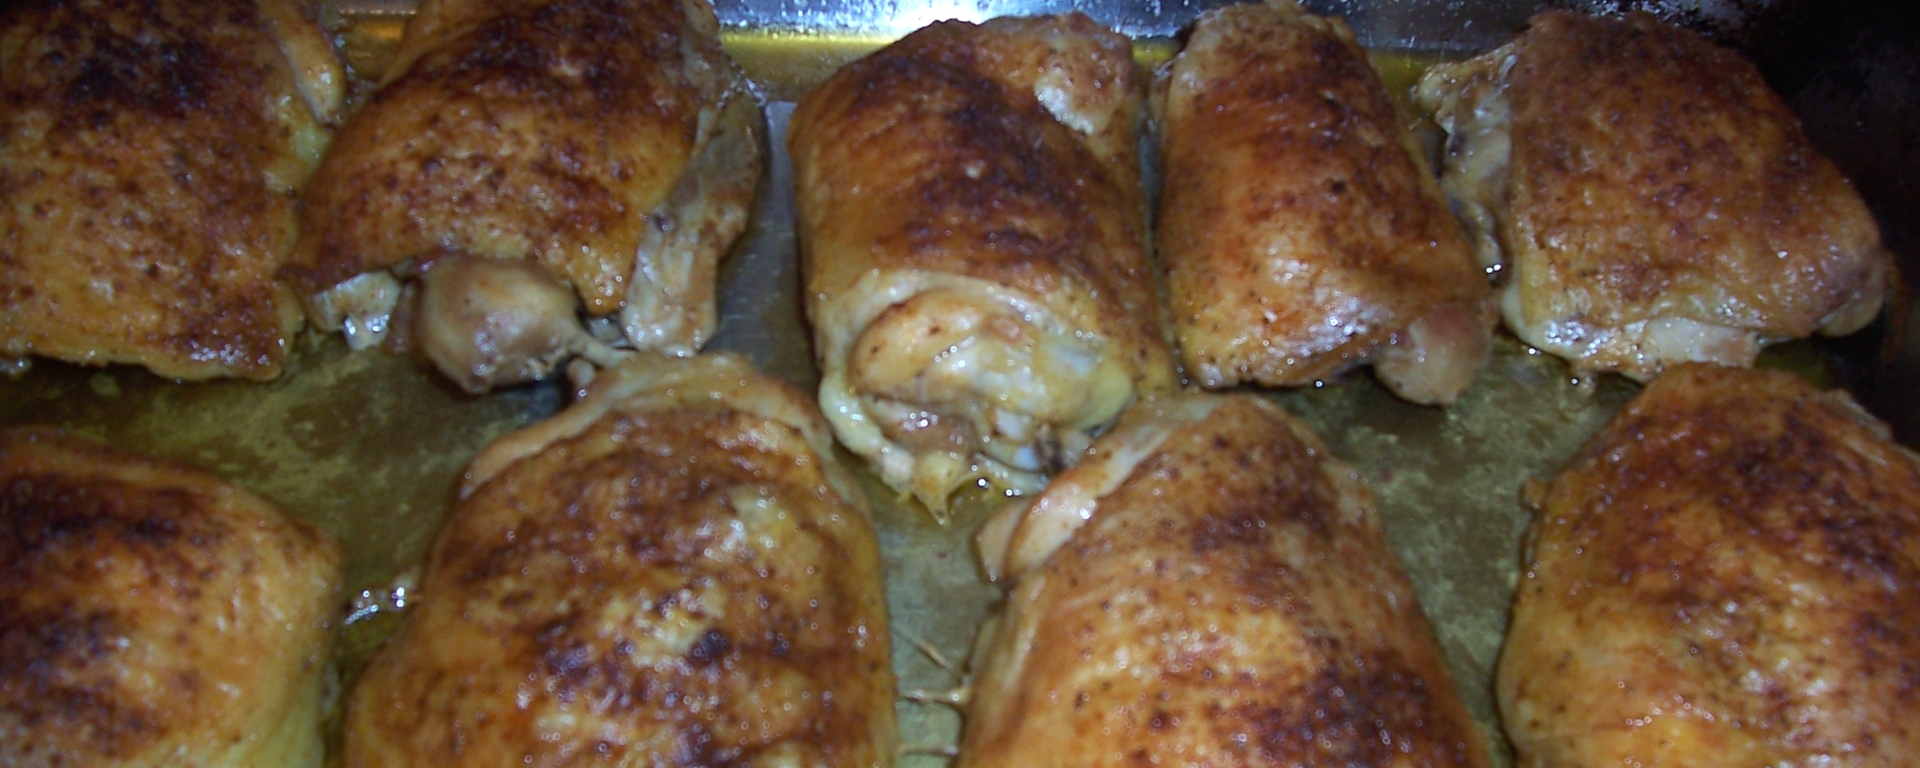 LuvMyRecipe.com - Easy Baked Chicken Thighs Featured